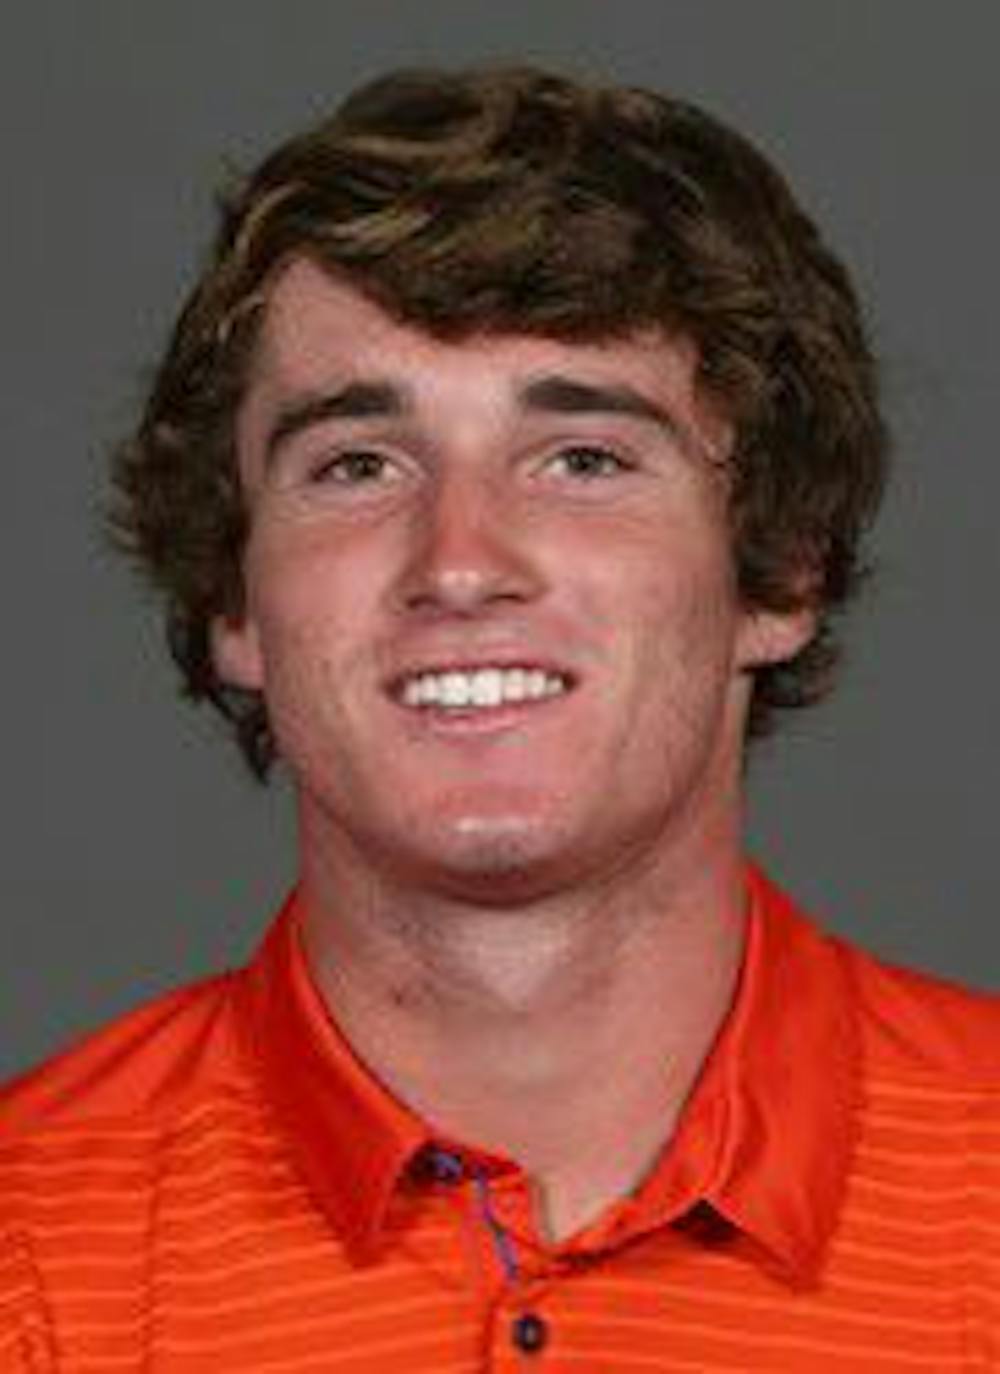 <p>Oliver Crawford started his career at UF with two wins at the ITA Regional Championships in Atlanta.&nbsp;<span id="docs-internal-guid-54afb9b9-23a8-460d-99c2-b0d927981c57"><span>“Great to see Oliver play his first collegiate matches,” coach Bryan Shelton said. “I am sure he will get better with each match he plays.”</span></span></p>